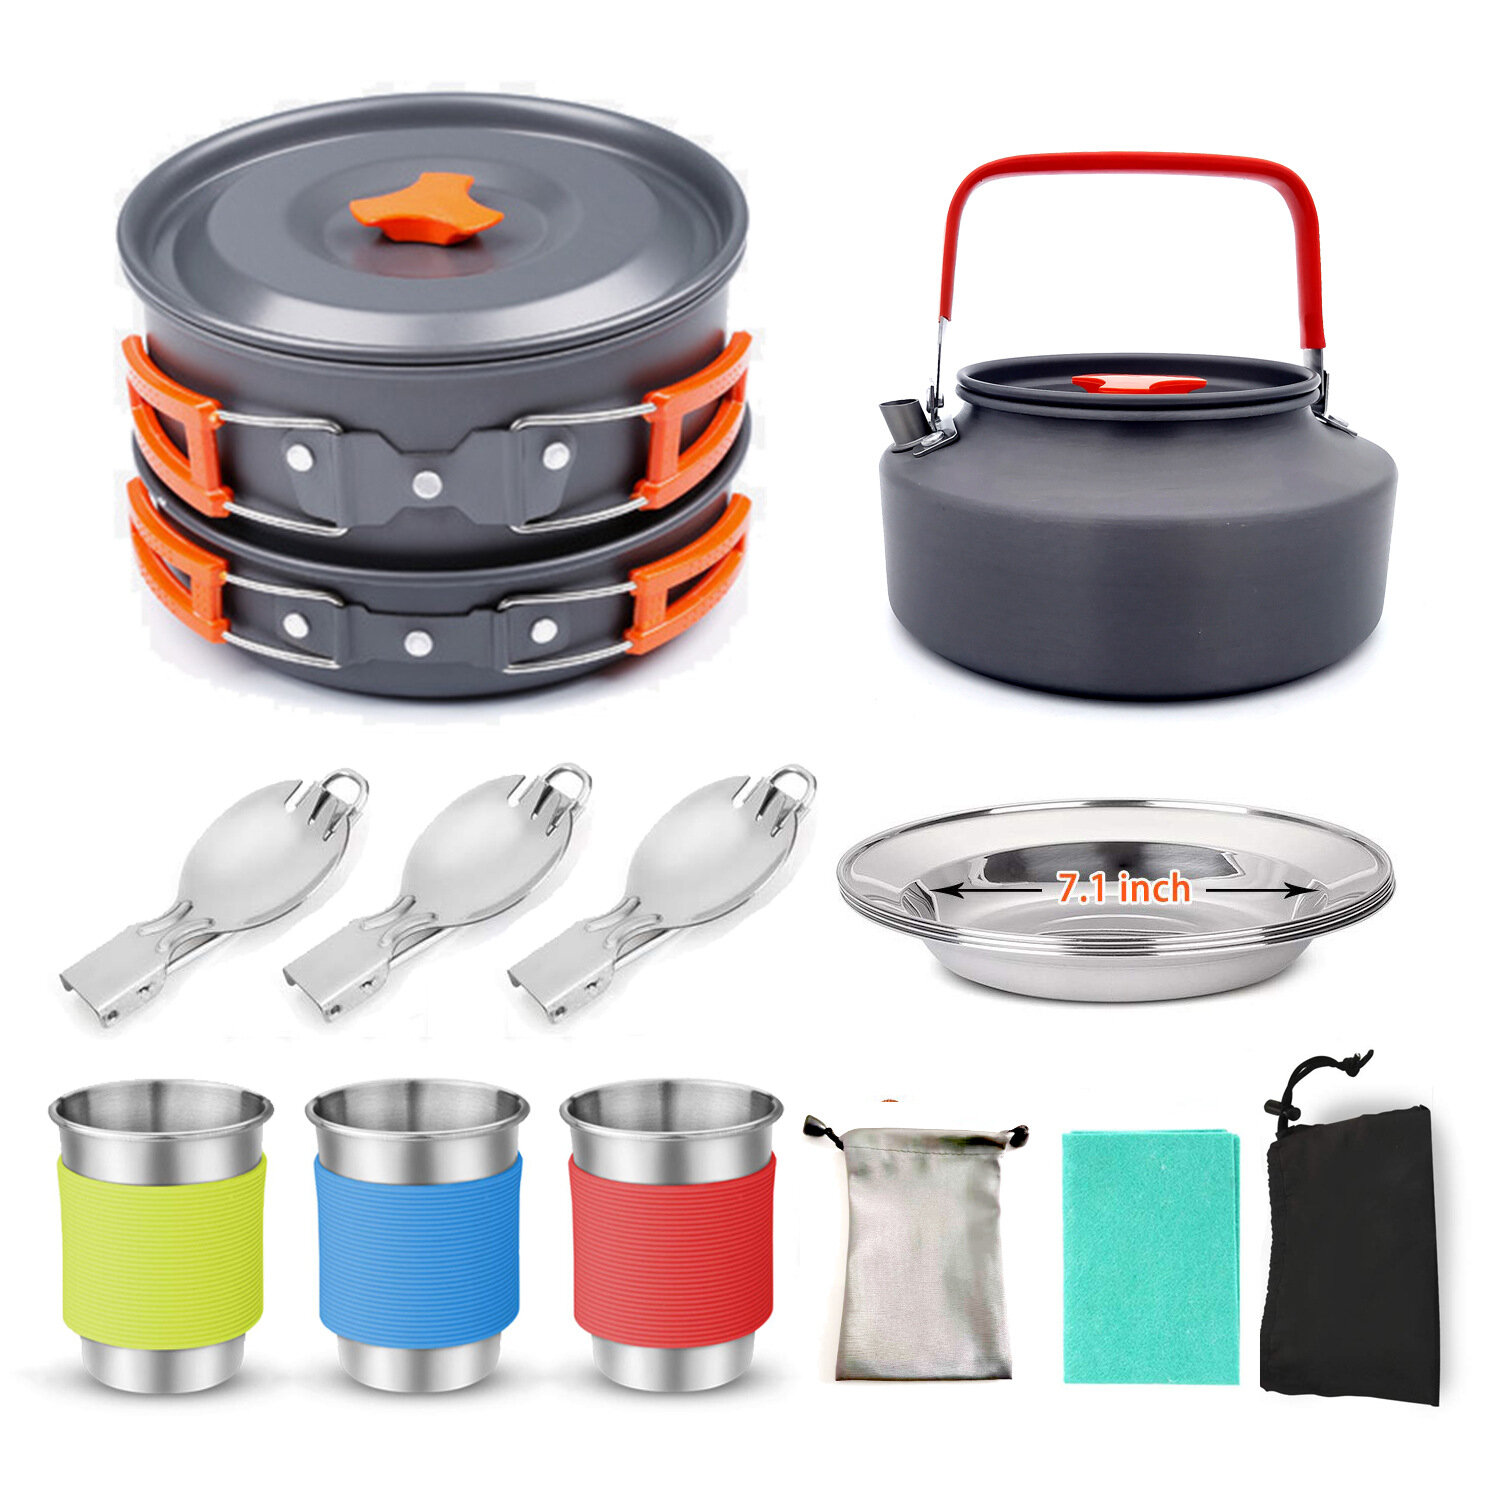 Barbhorse Outdoor Picnic Tableware Camping Pot Trekking Stove Pieces Set Pot + Plates + Kettle + Cups + Forks Cooking Fr